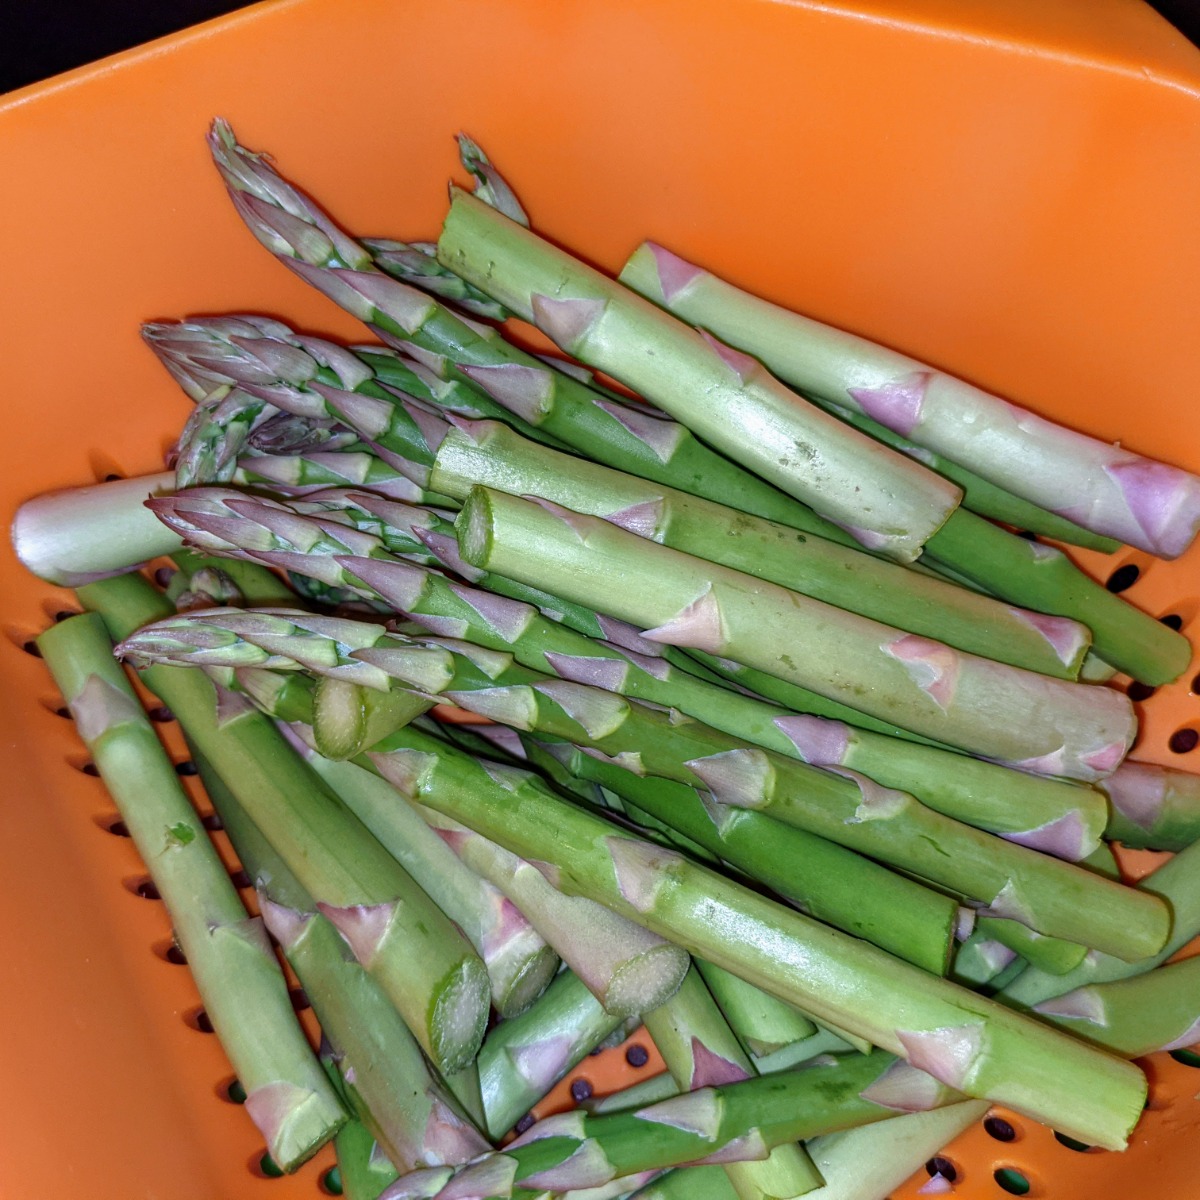 Find companion plants for asparagus to improve your harvest!